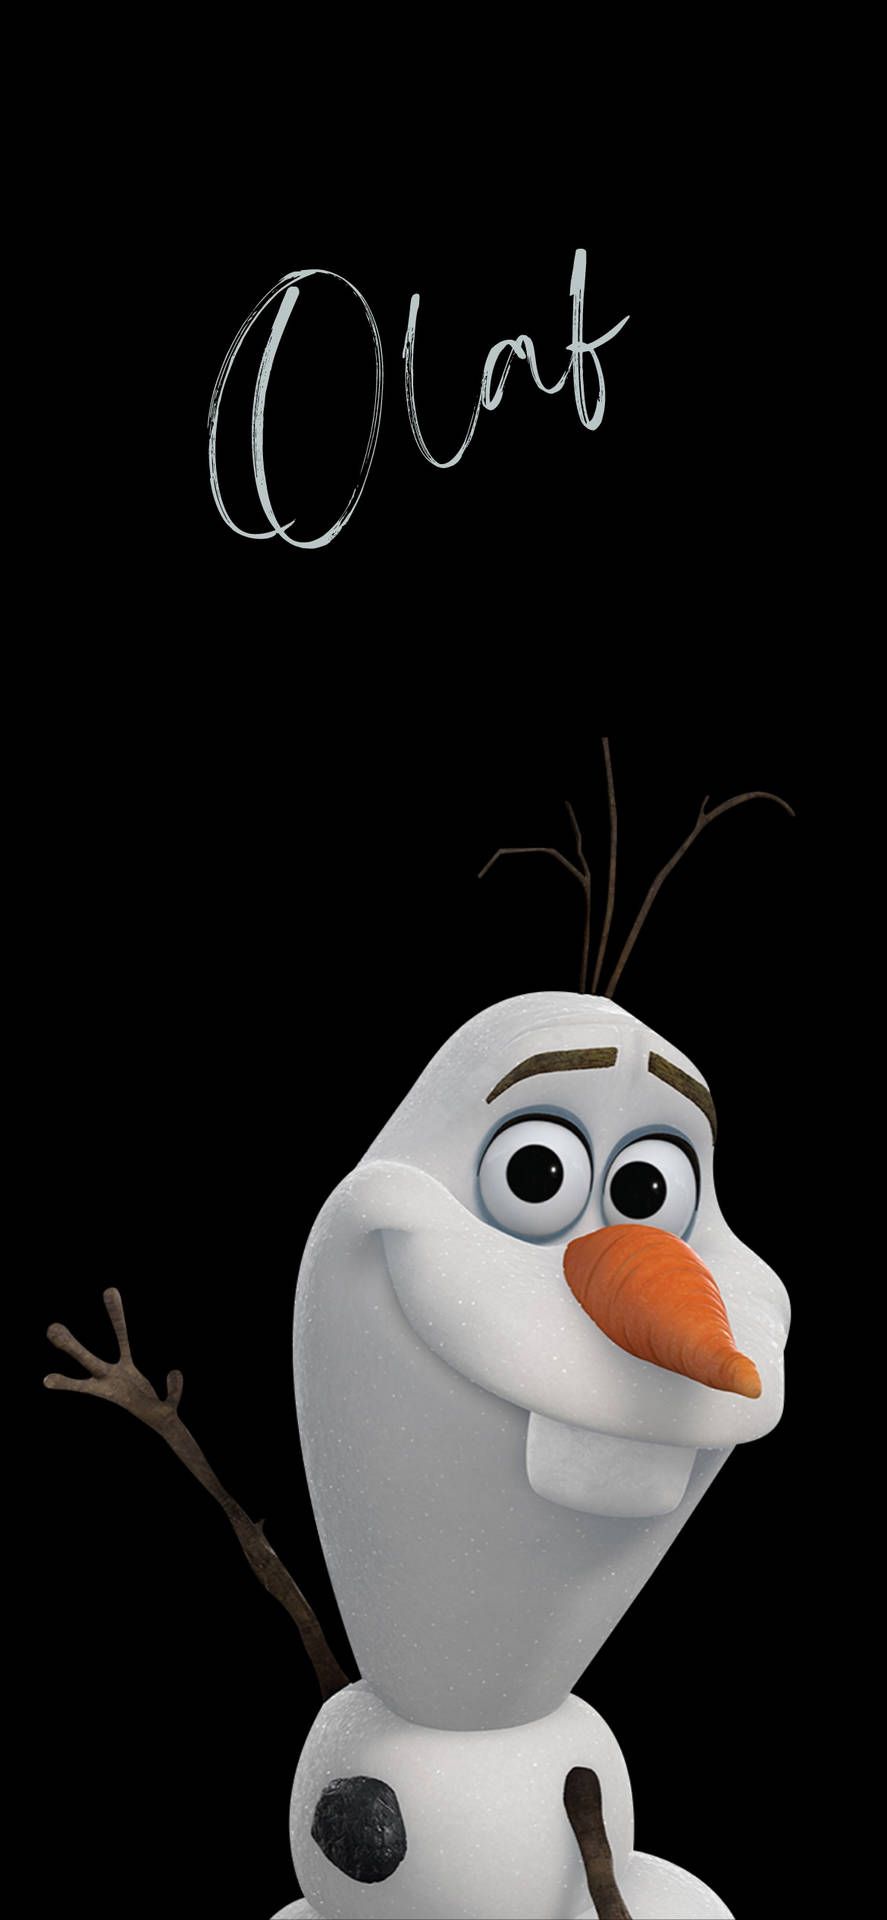 A frozen snowman is holding up his hand - Olaf